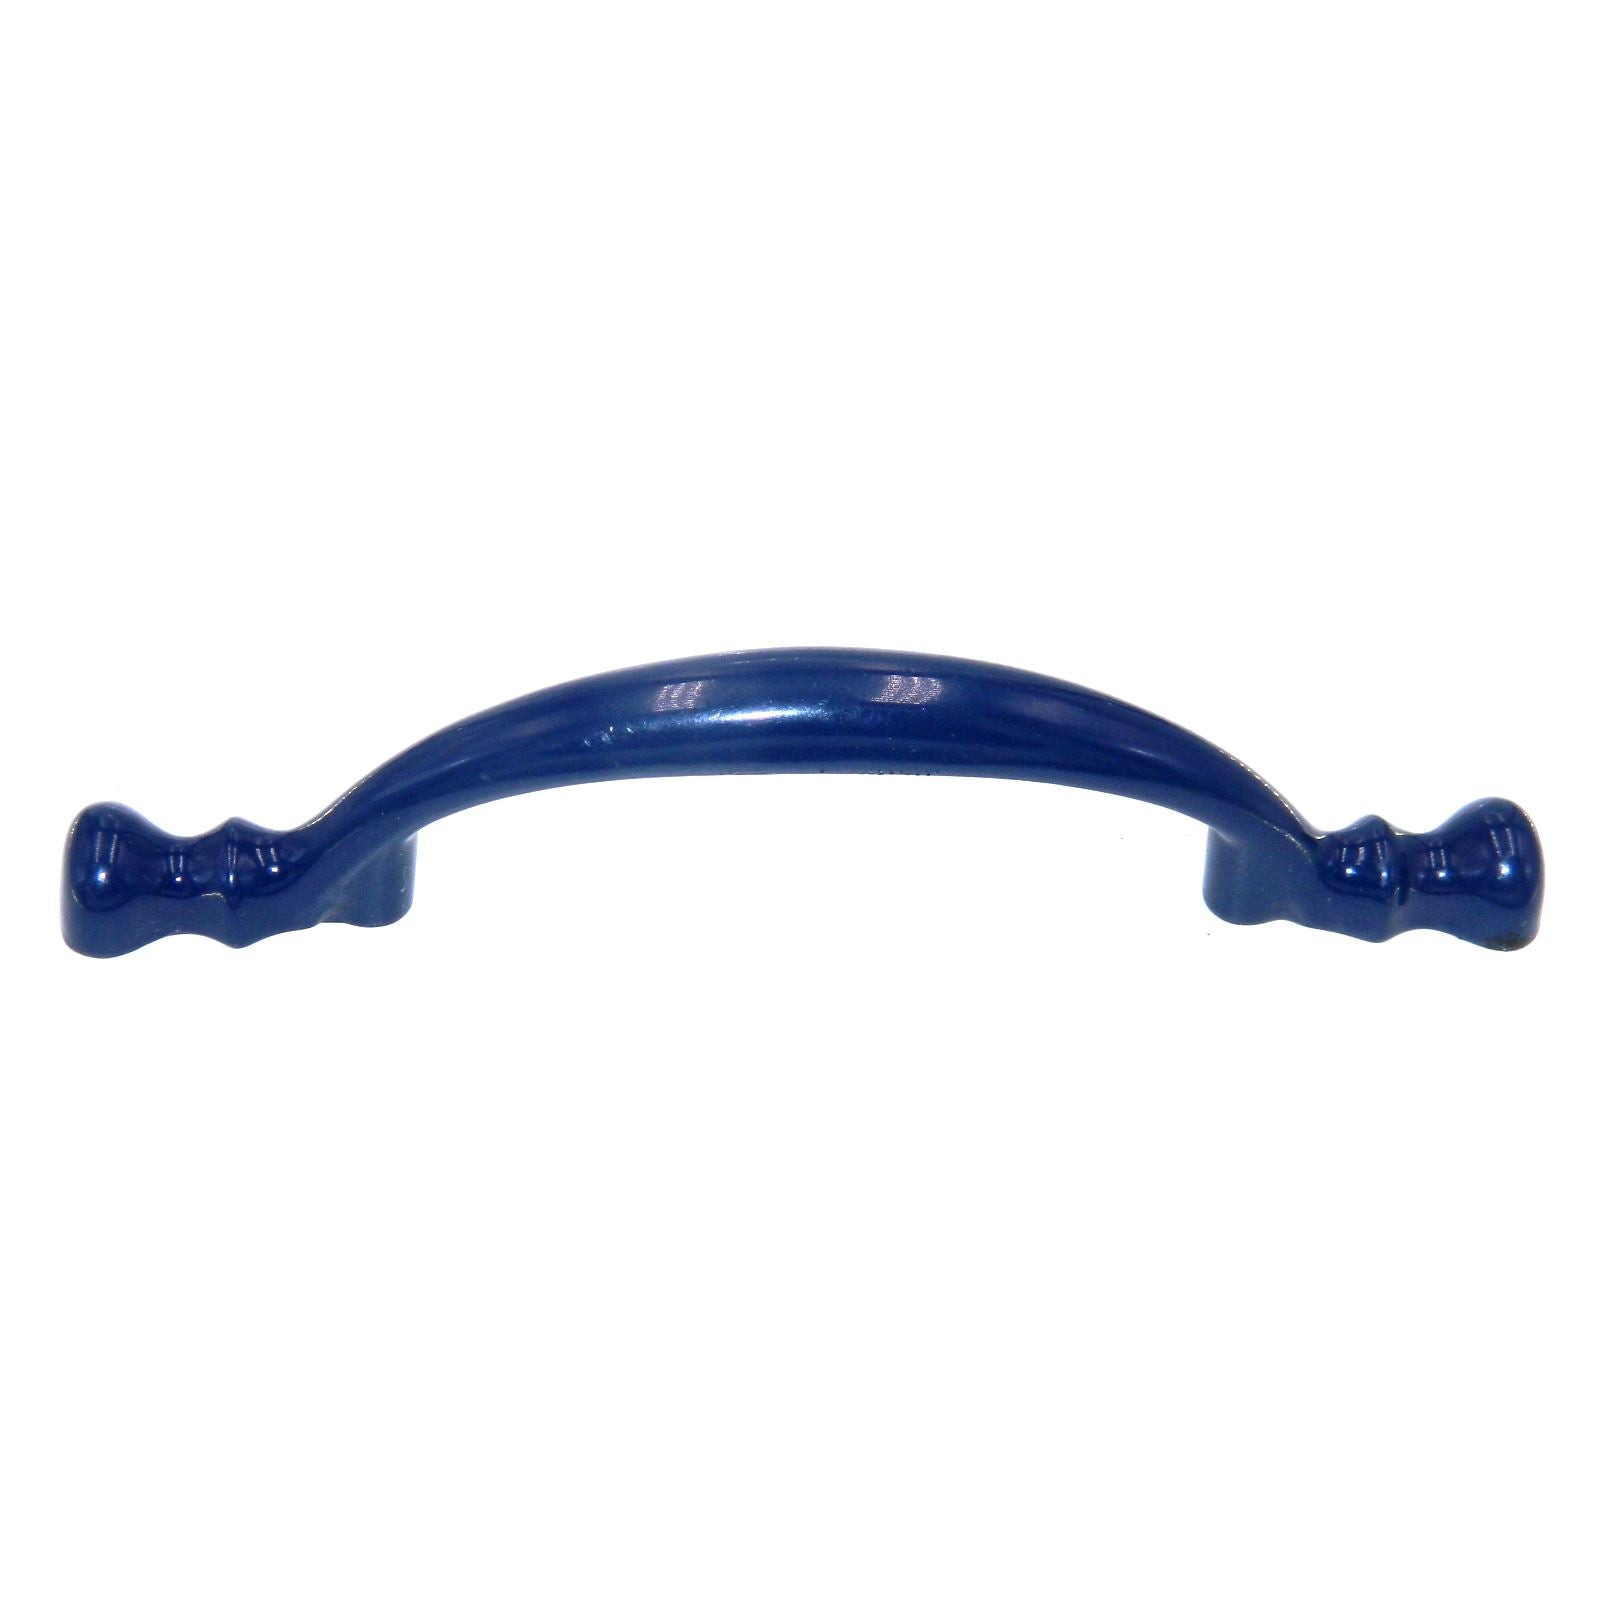 Amerock Colors Navy Blue 3" Ctr. Cabinet Arch Pull Handle BP874-NB